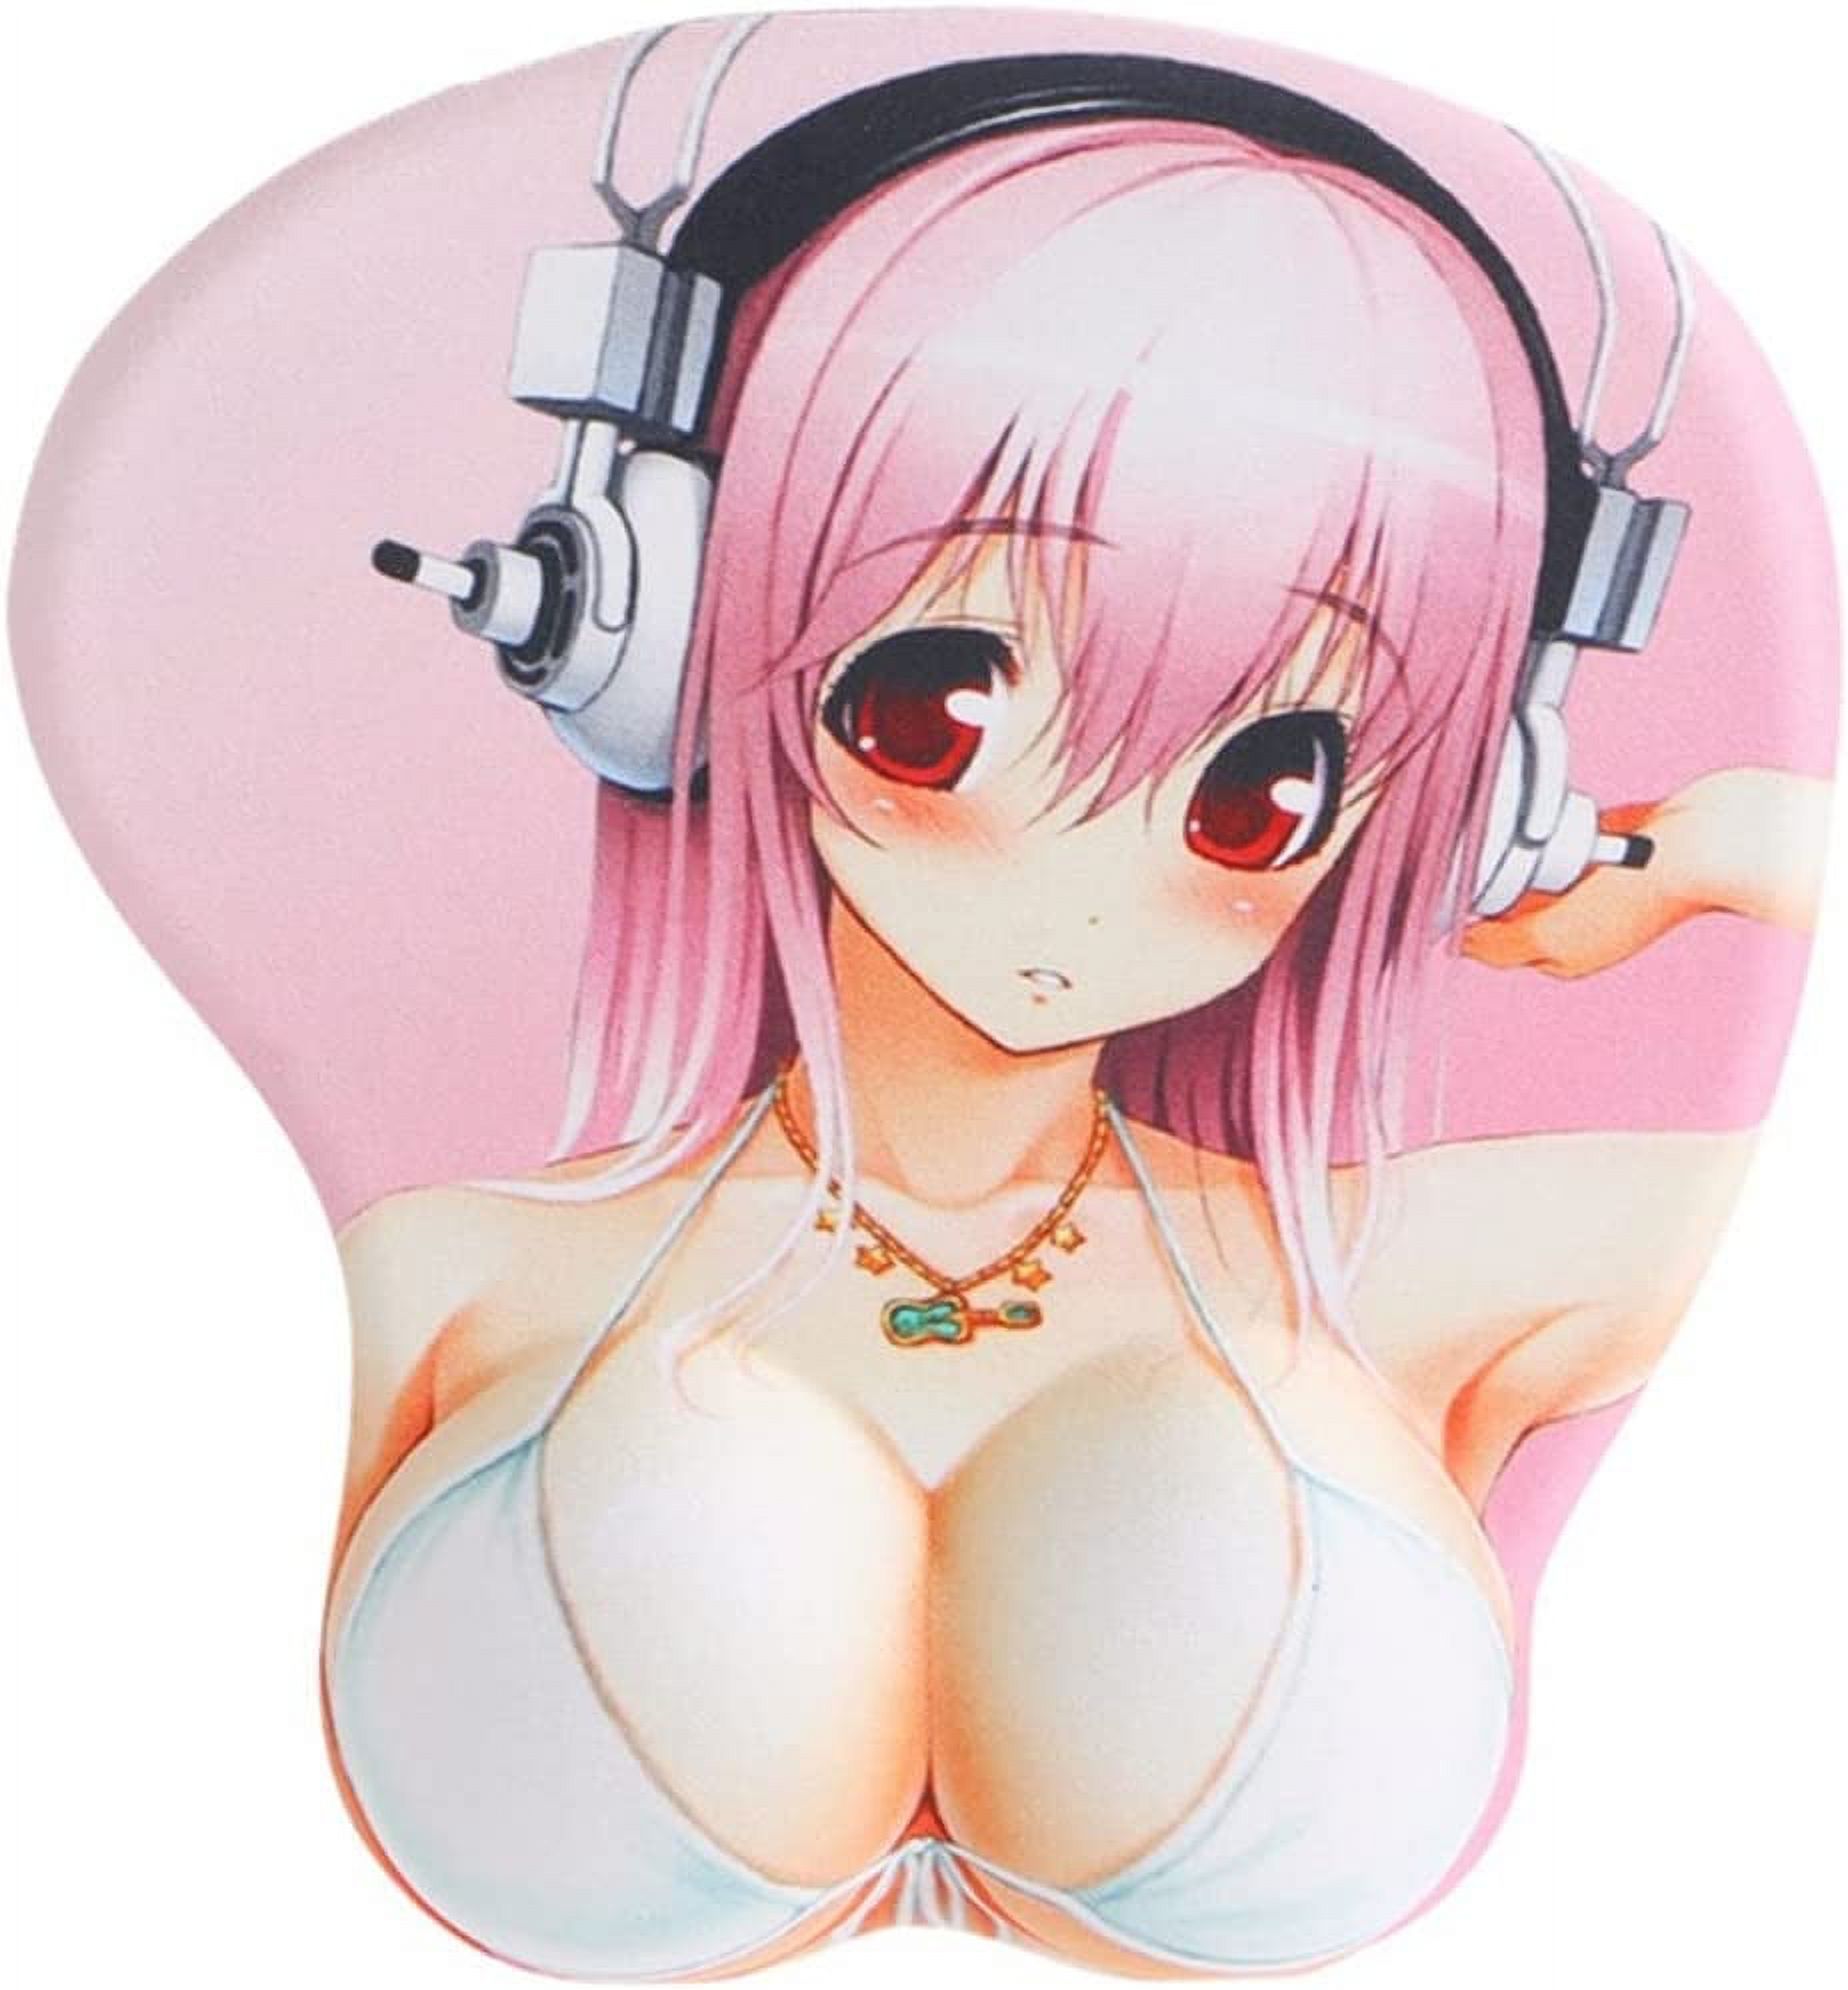 3D Anime Beautiful Girl Beauty Wrist Support Mousepad - Cartoon Non-Slip Gaming Mouse Pads, Silicone Anime Cute Girl Mouse Mat for Computer,Laptop-Classical Beauty - image 1 of 5